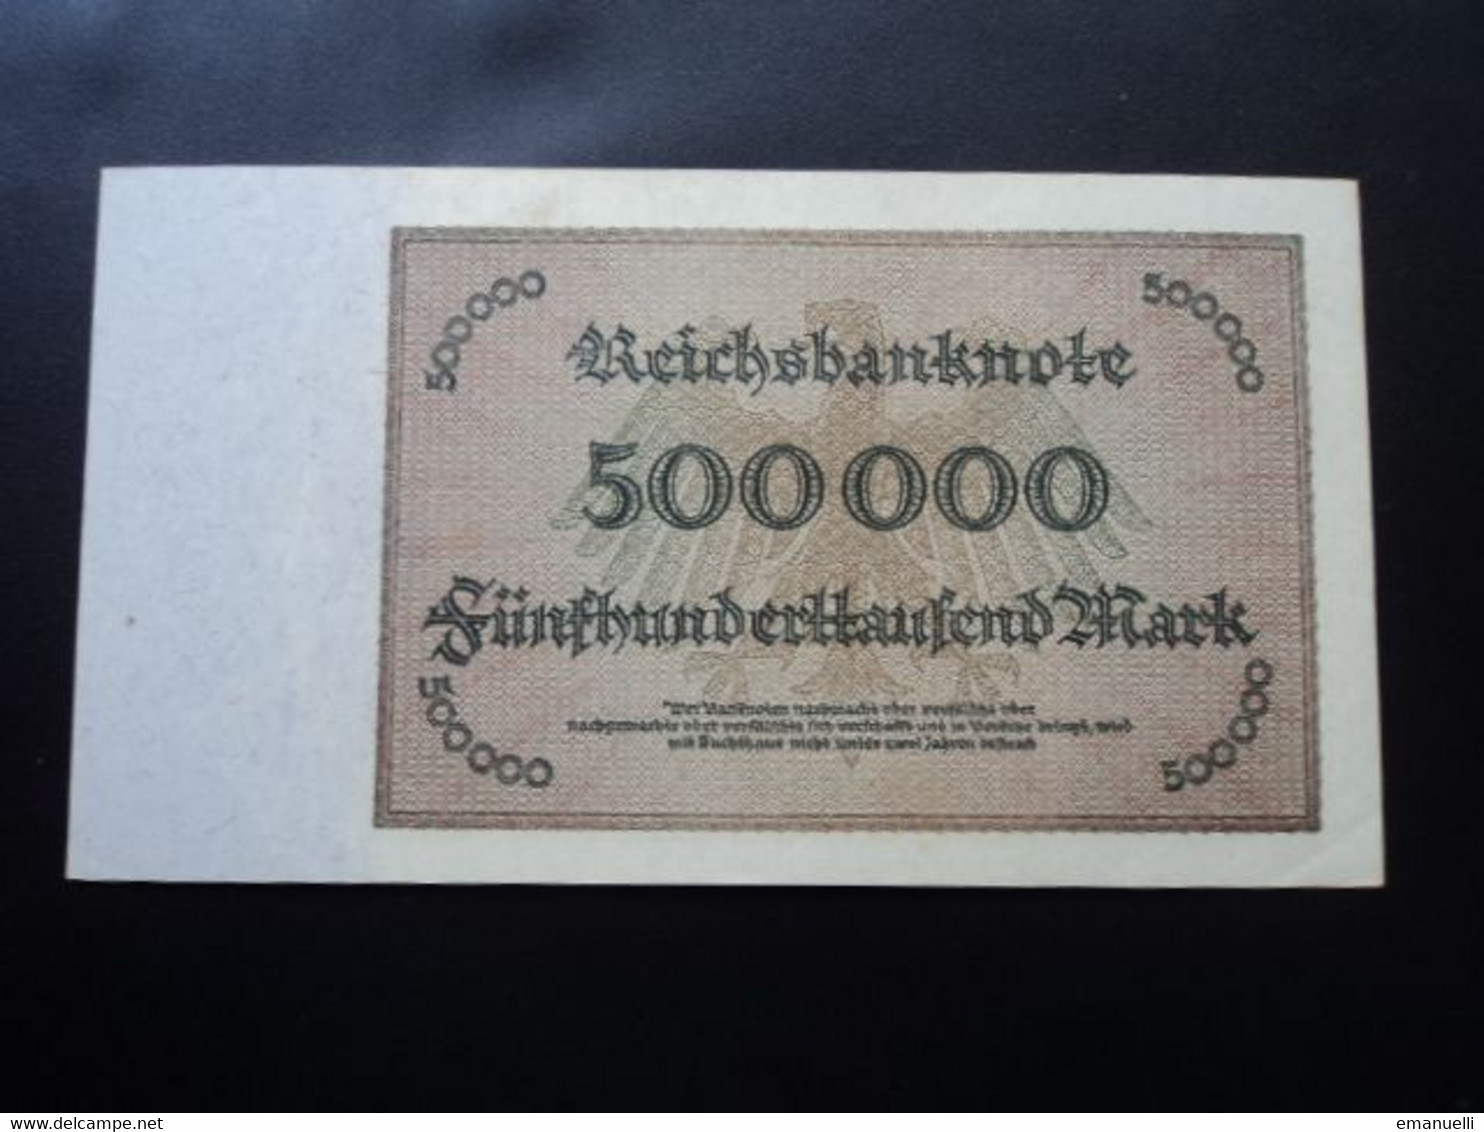 ALLEMAGNE * : 500 000  MARK   1.5.1923     CA 87f,  ** / P 88b     SUP+ - 500000 Mark